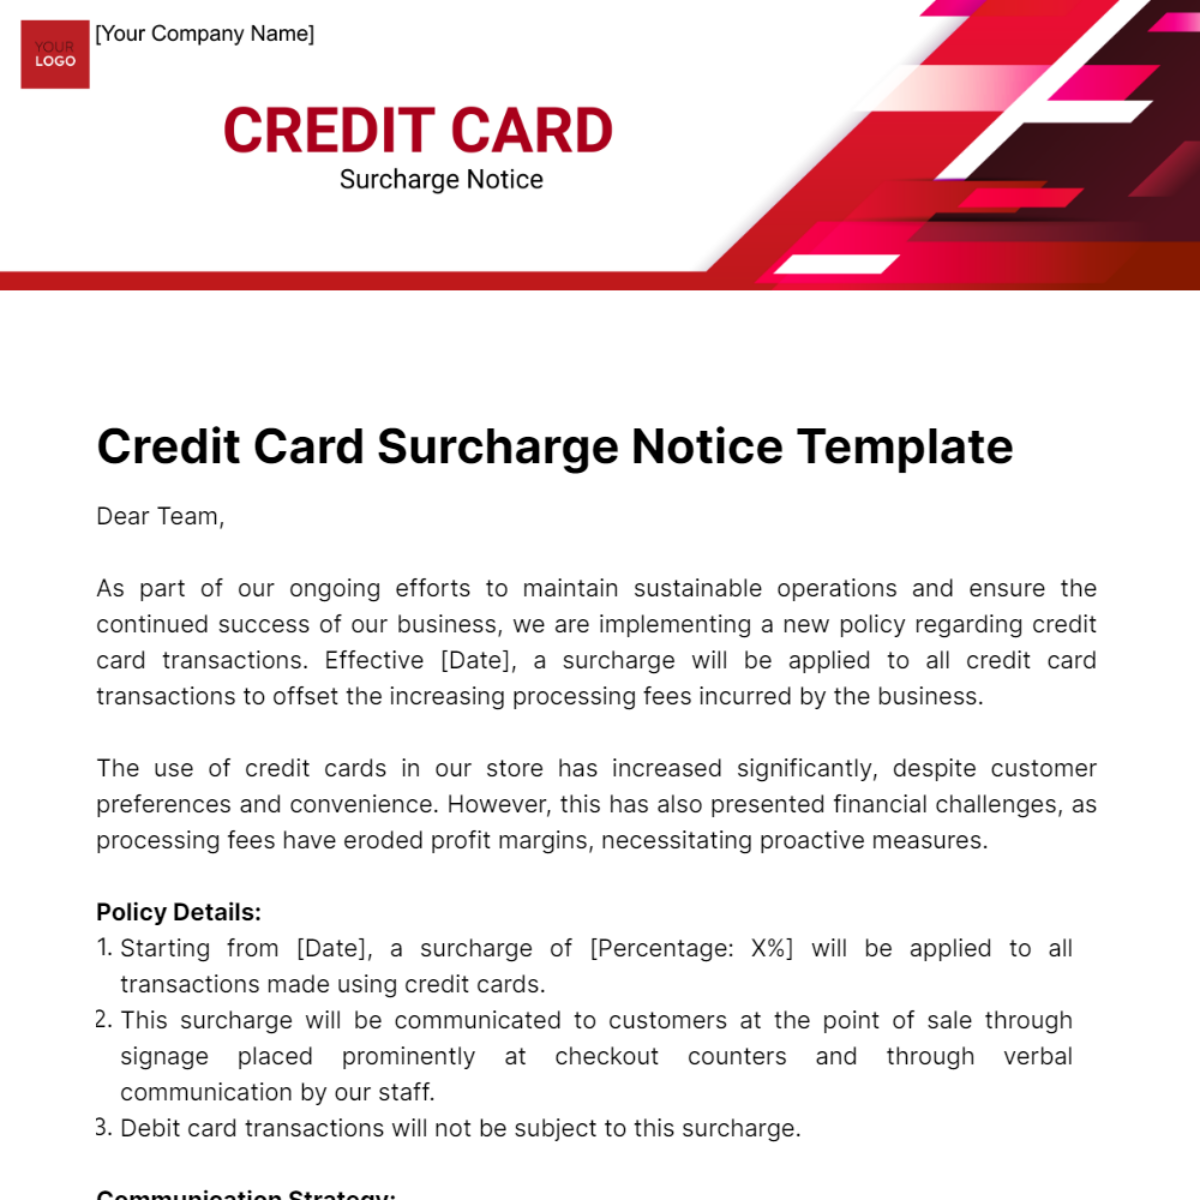 Free Credit Card Surcharge Notice Template